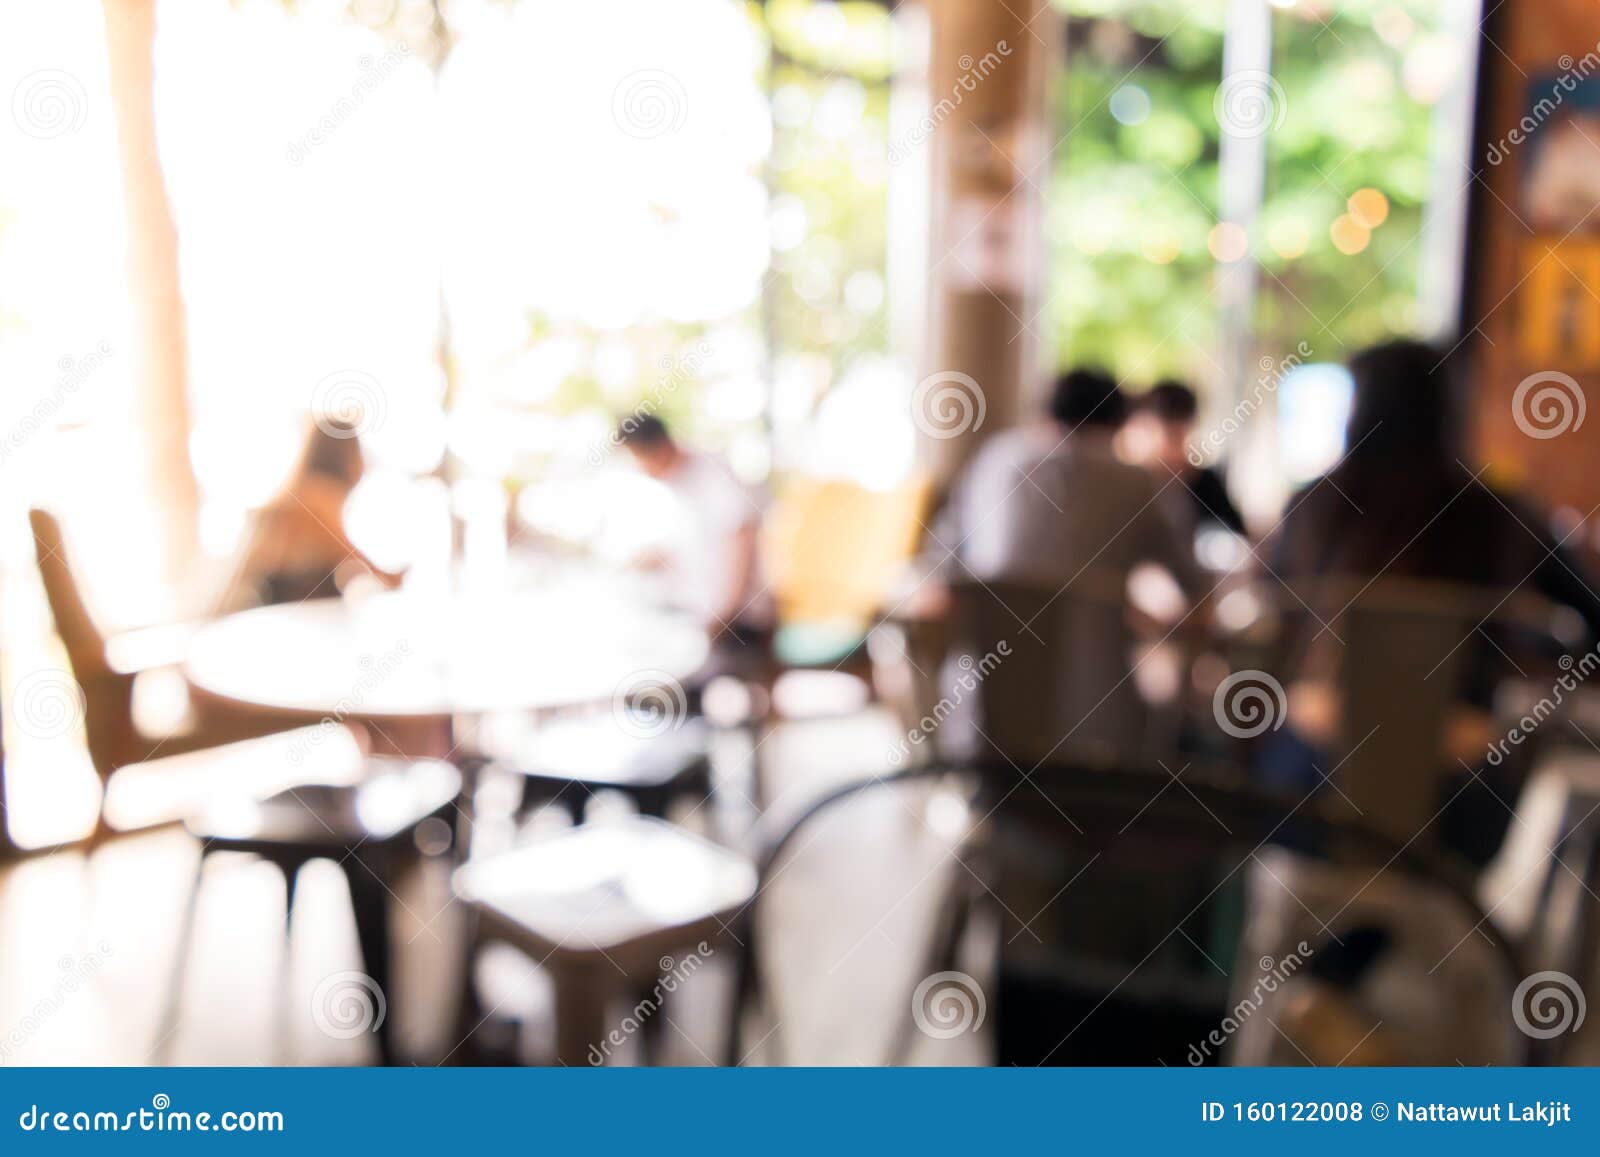 Blurred Background of Restaurant with People Stock Photo - Image of  closeup, dining: 160122008